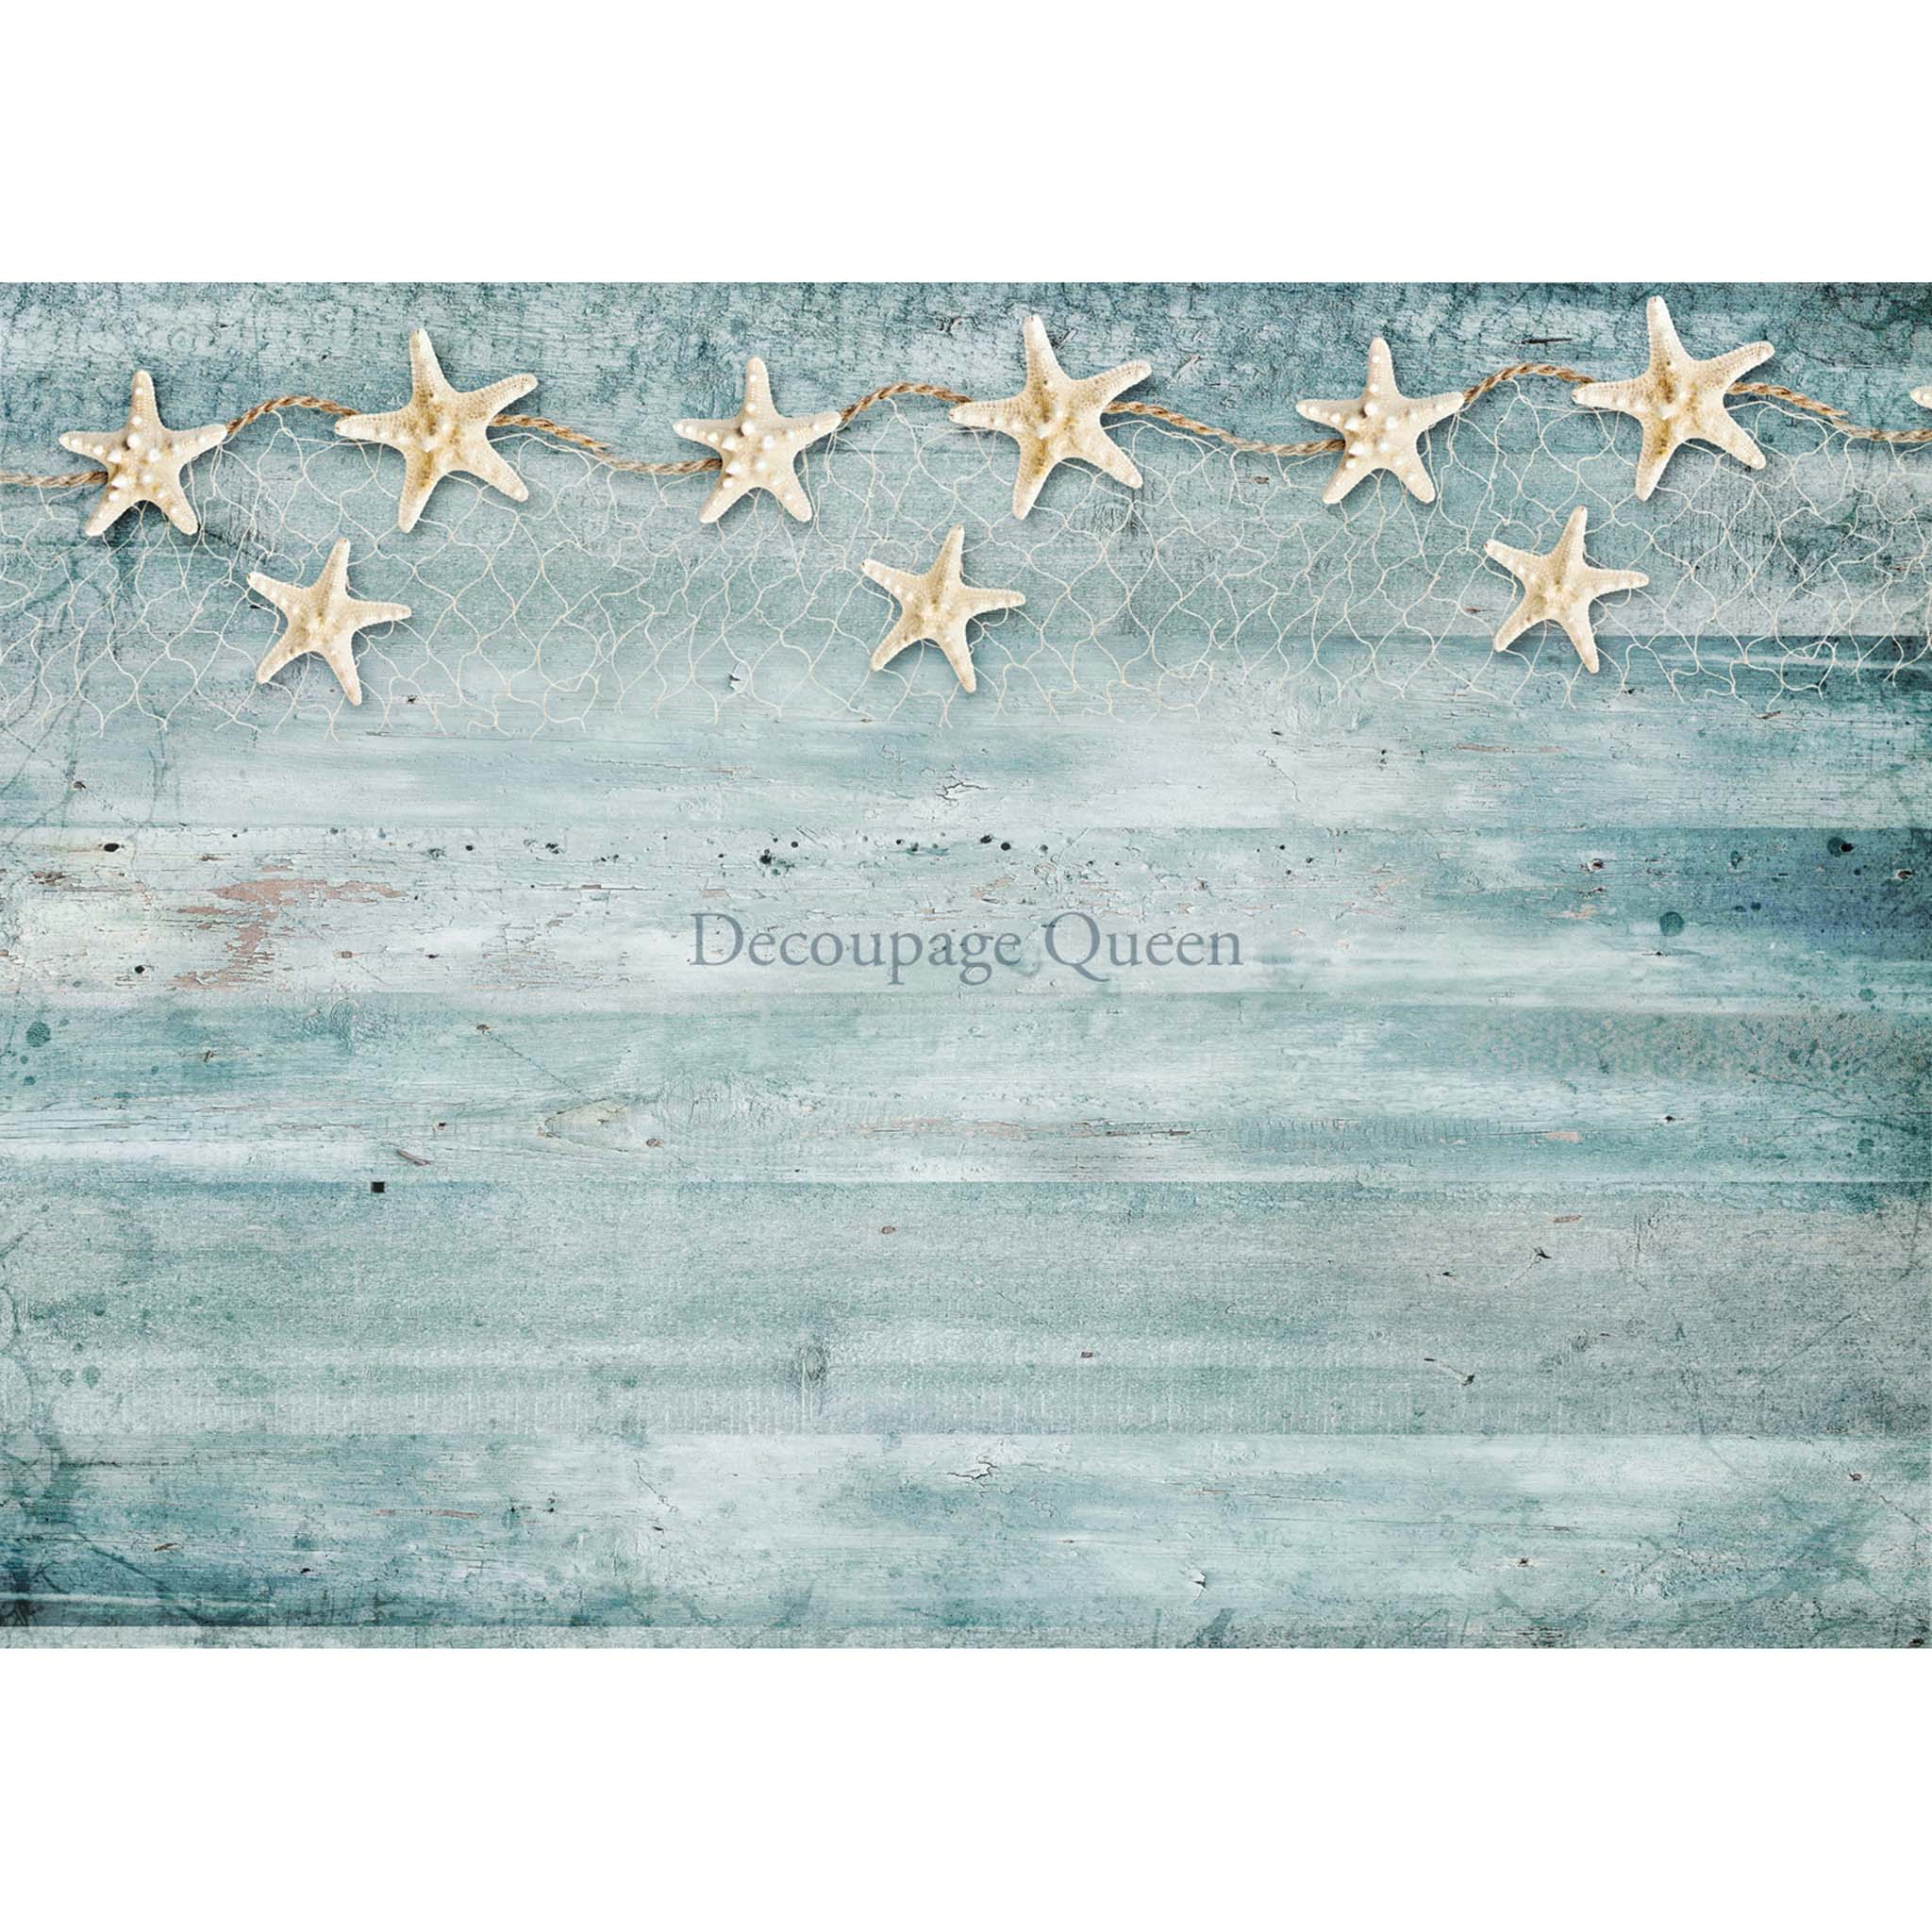 A3 rice paper design featuring a worn plank design in shades of seafoam, blue, and gray, behind a nautical net and starfish. White borders are on the top and bottom.